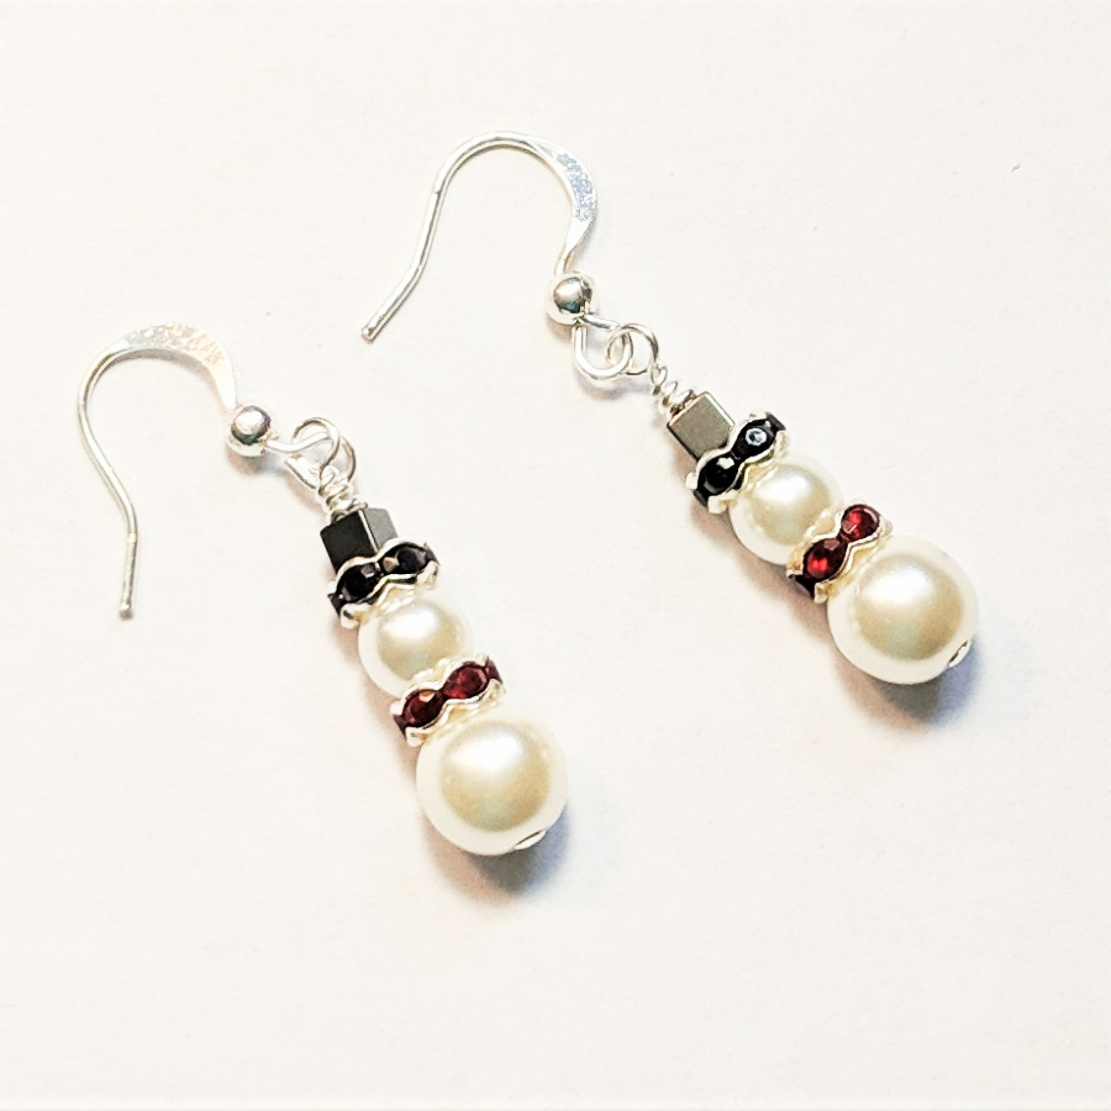 Snowman Earrings with Red Rondelle Accents